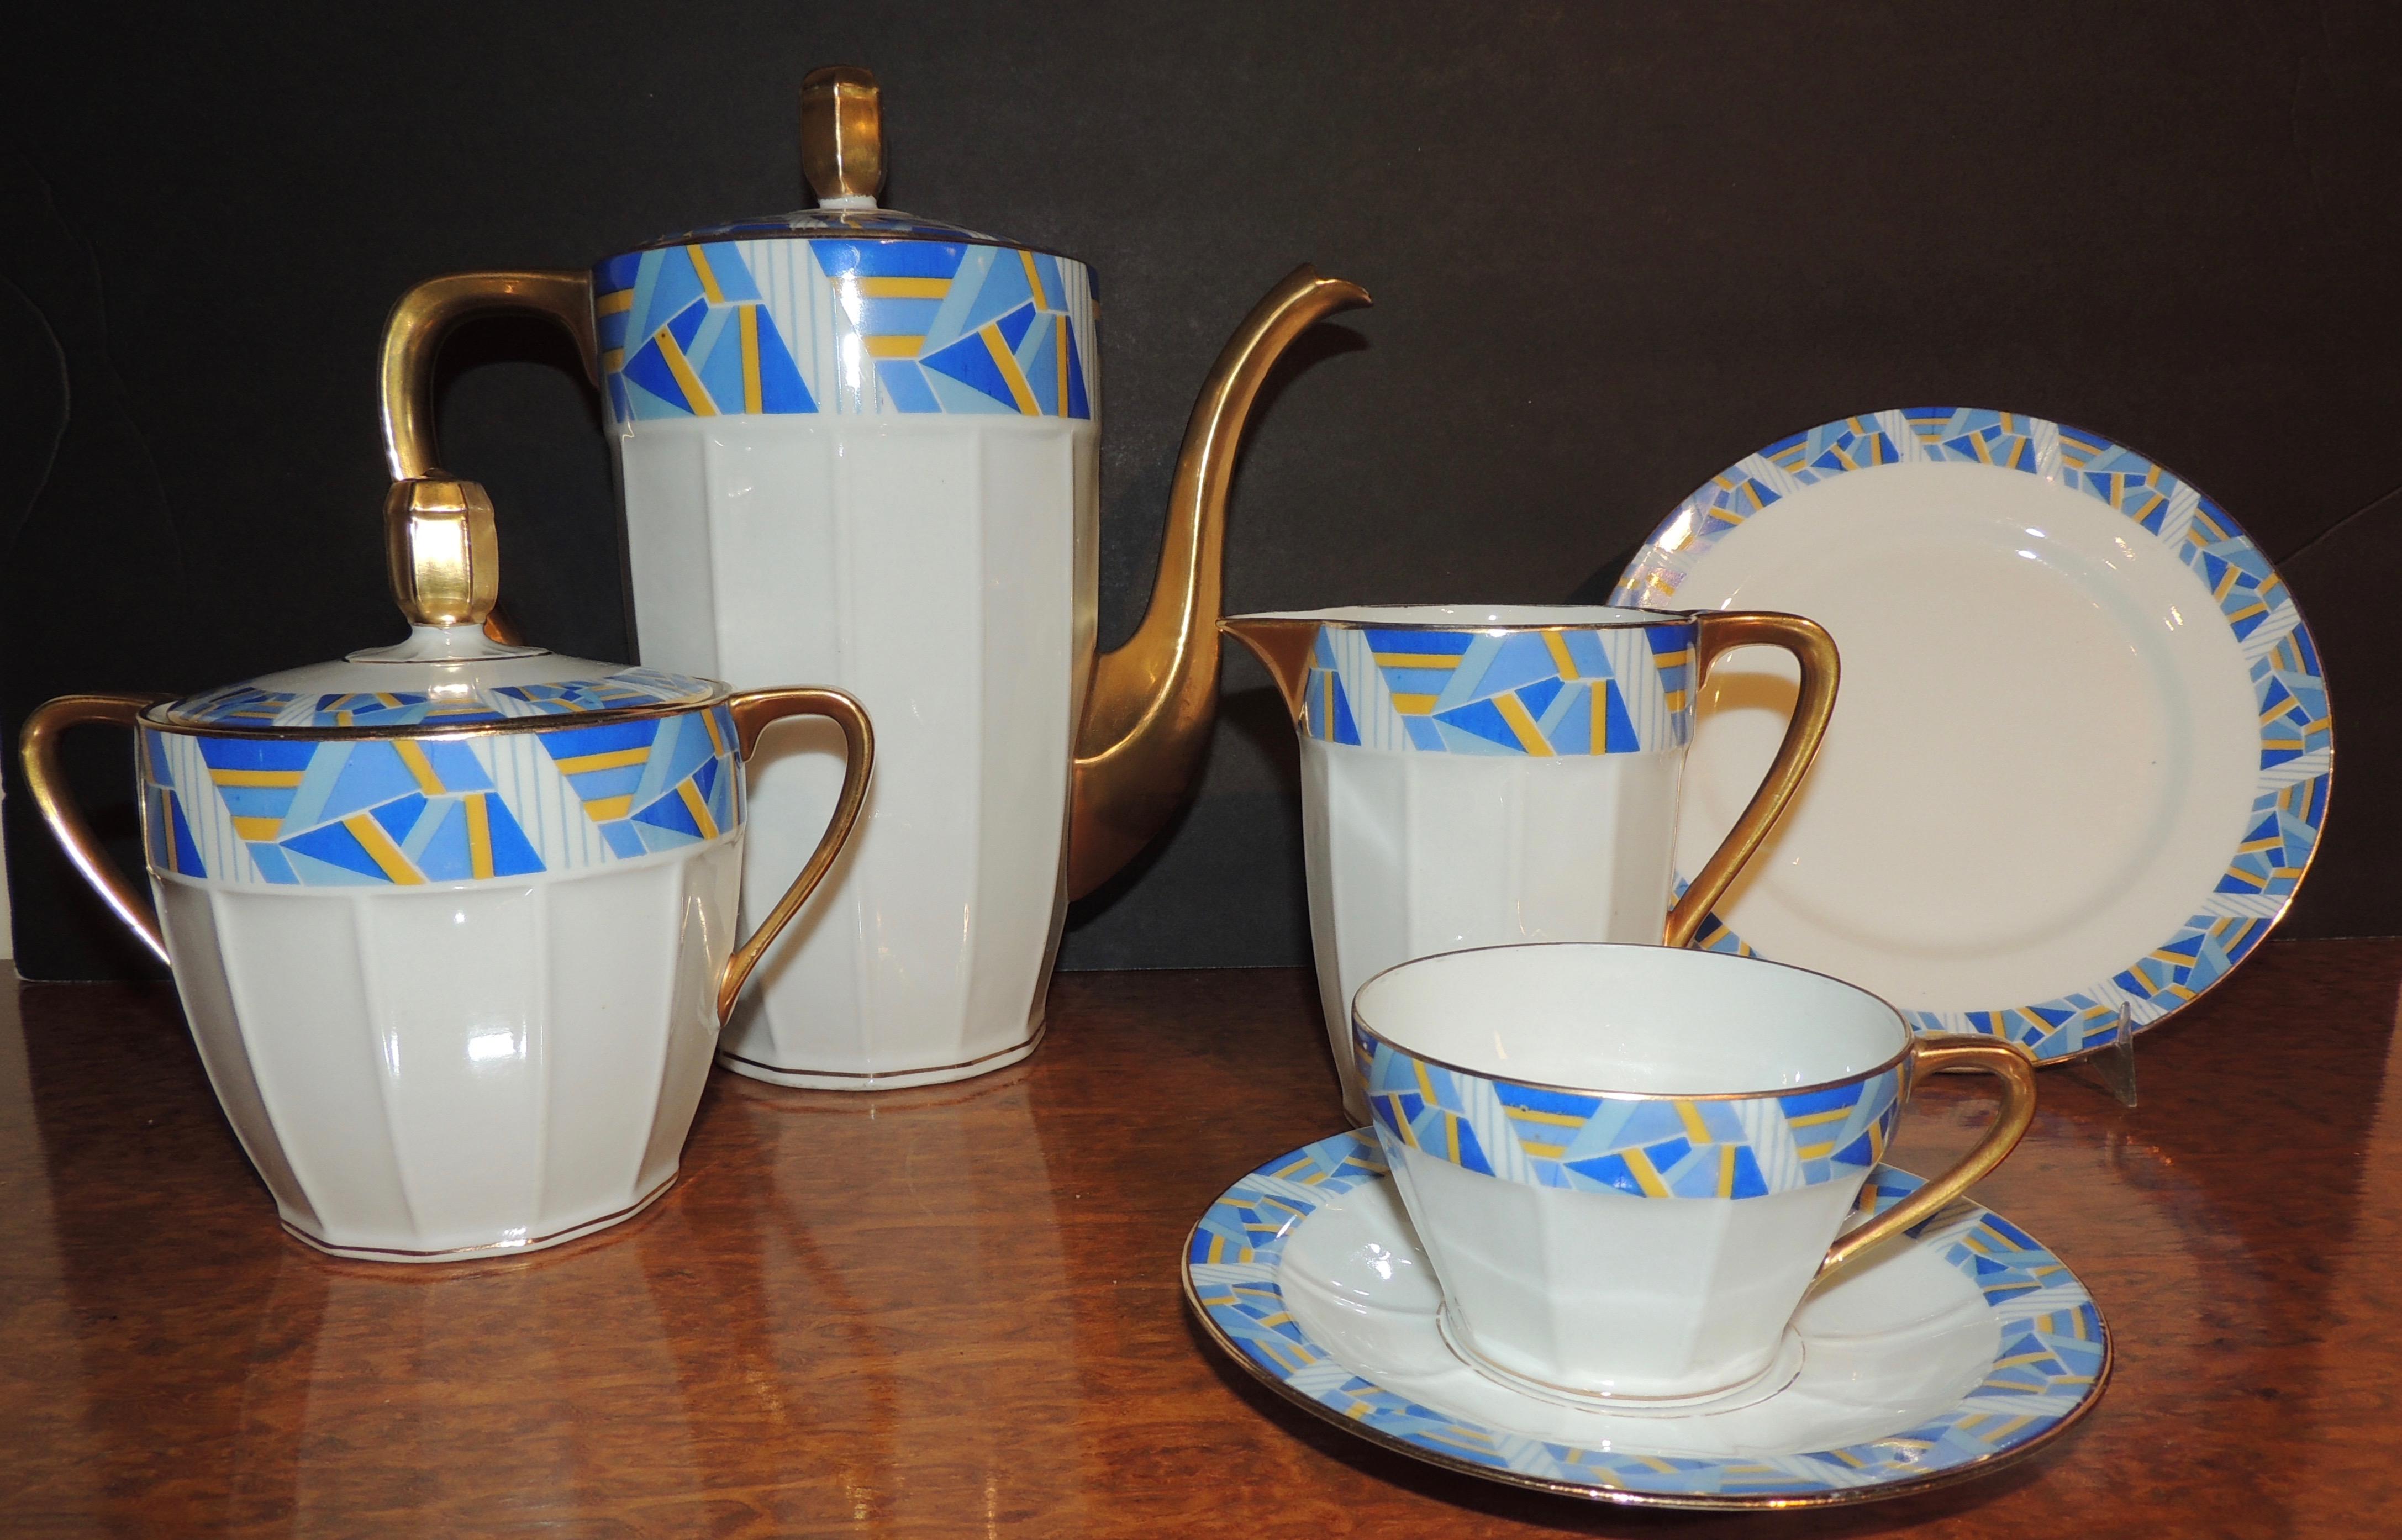 An Art Deco embellished china Dessert Set for Coffee or Tea from the company Vielle Abbaye in Limoges France.   This set is impeccable and includes a large coffee or teapot, creamer, sugar, twelve cups and saucers, ten dessert plates and extra small